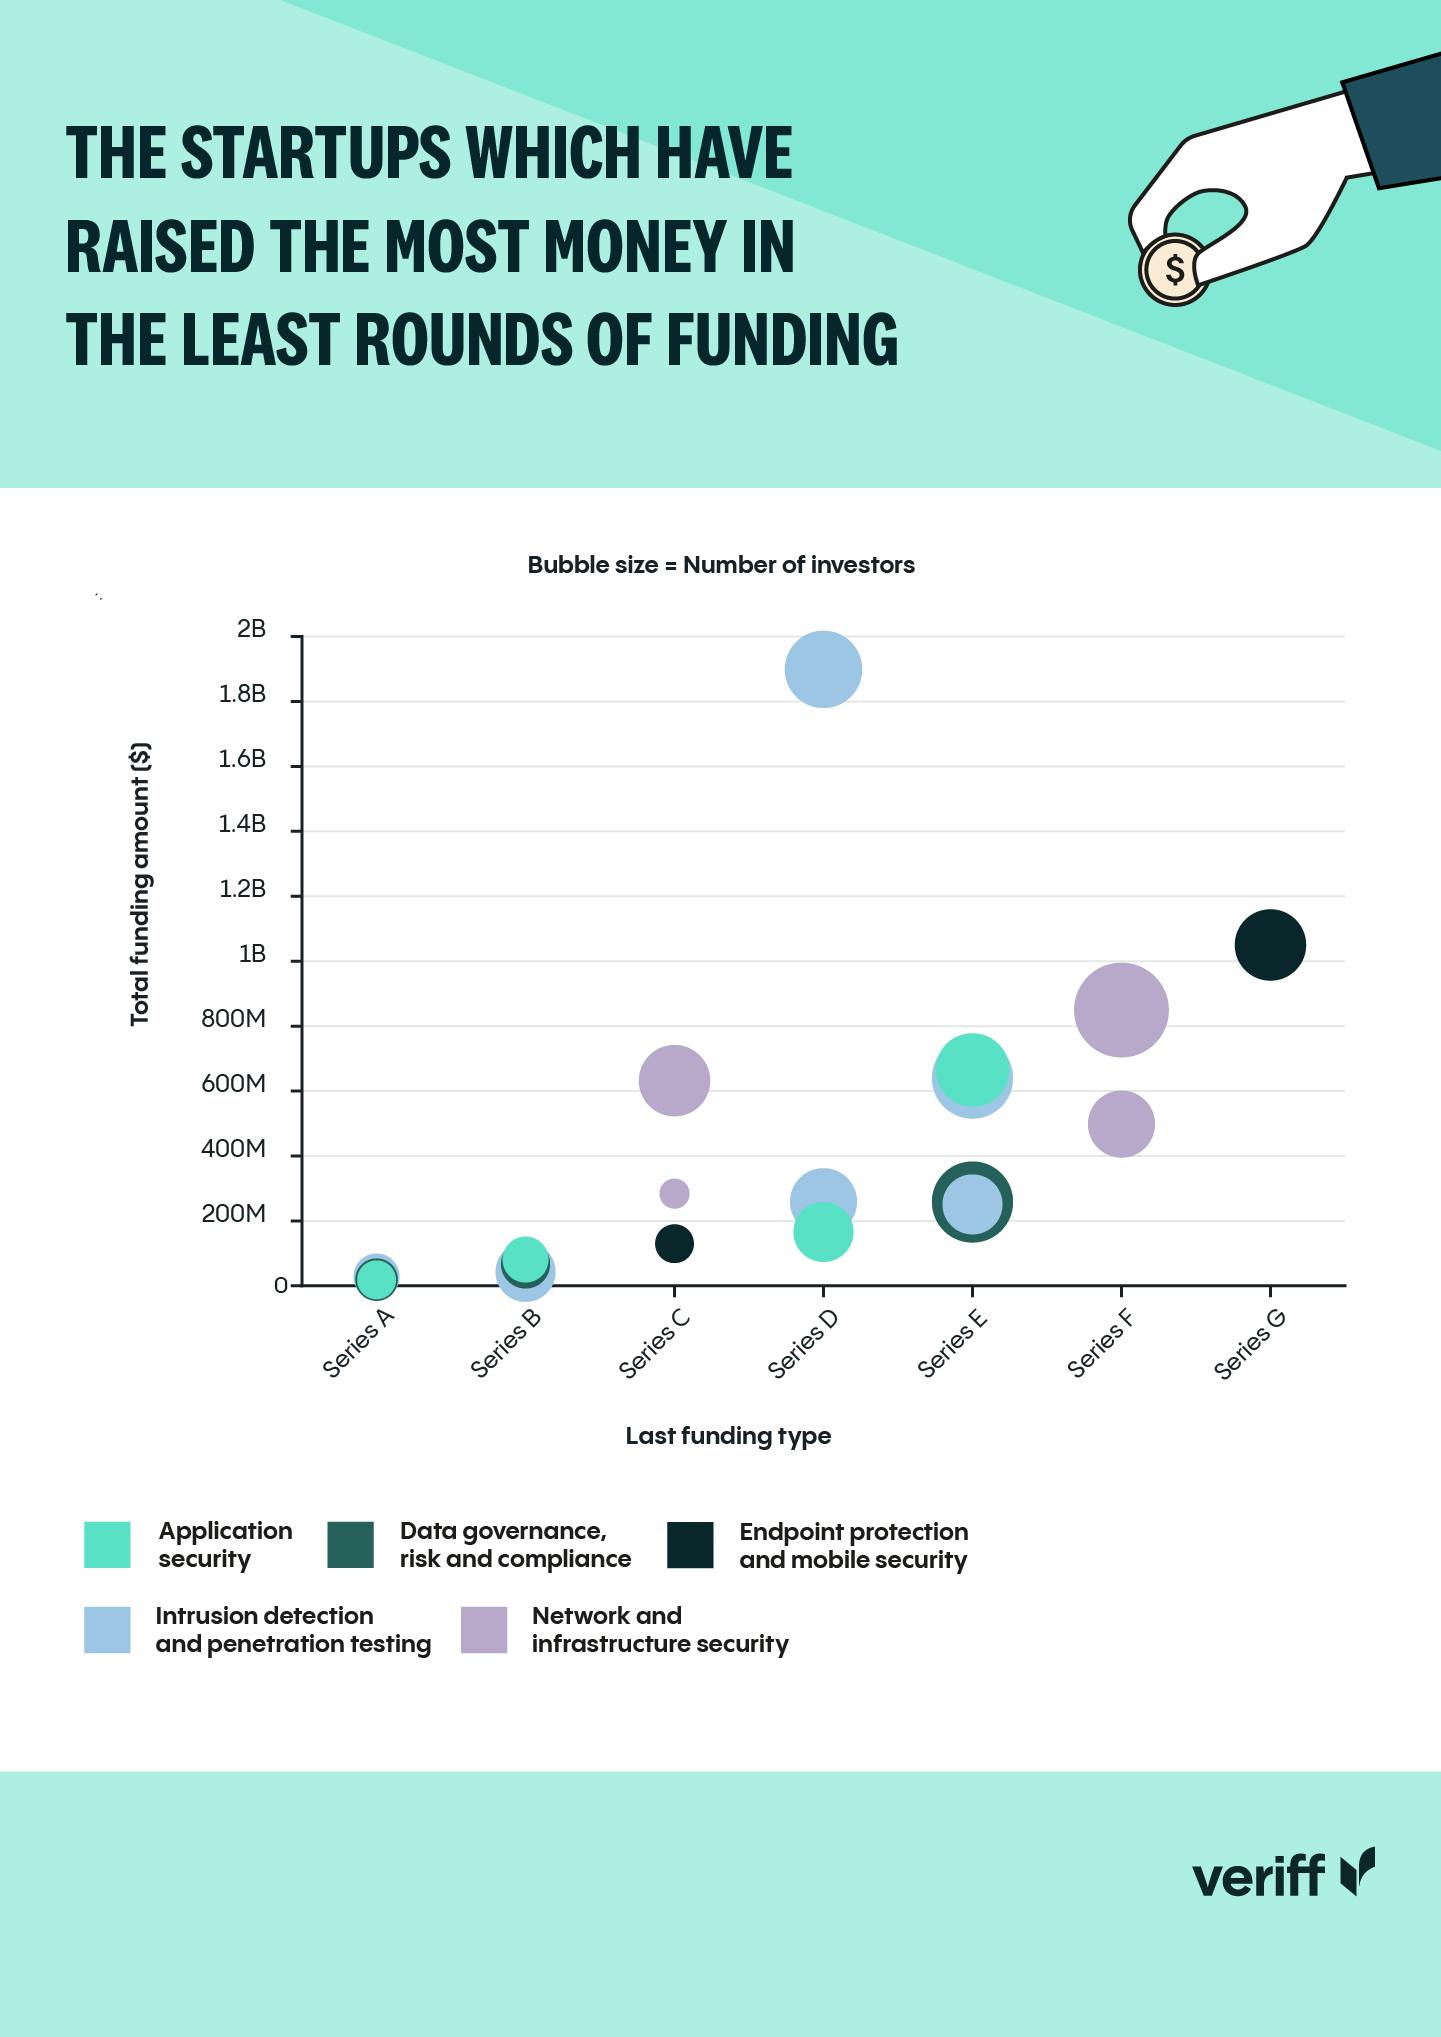 Graph showing the startups which have raised the most money in the least rounds of funding.